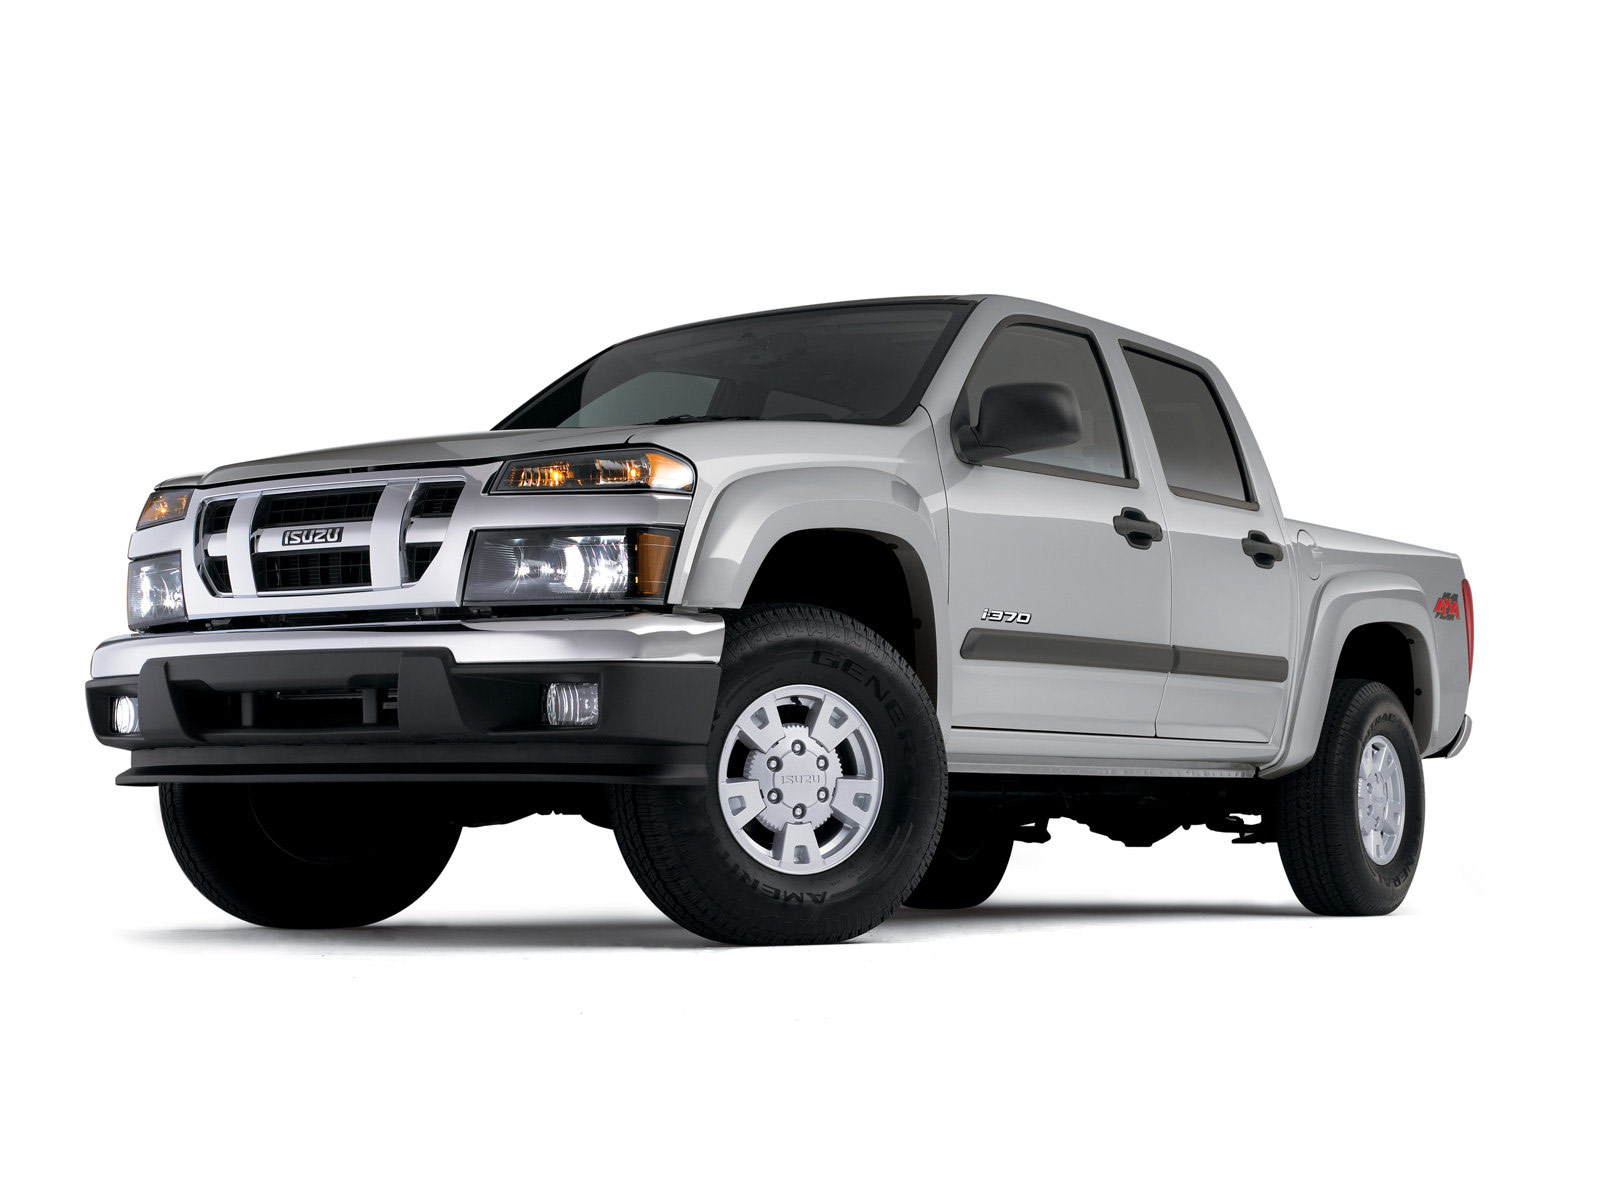 2008 Isuzu Pickup car pictures | accident lawyers information